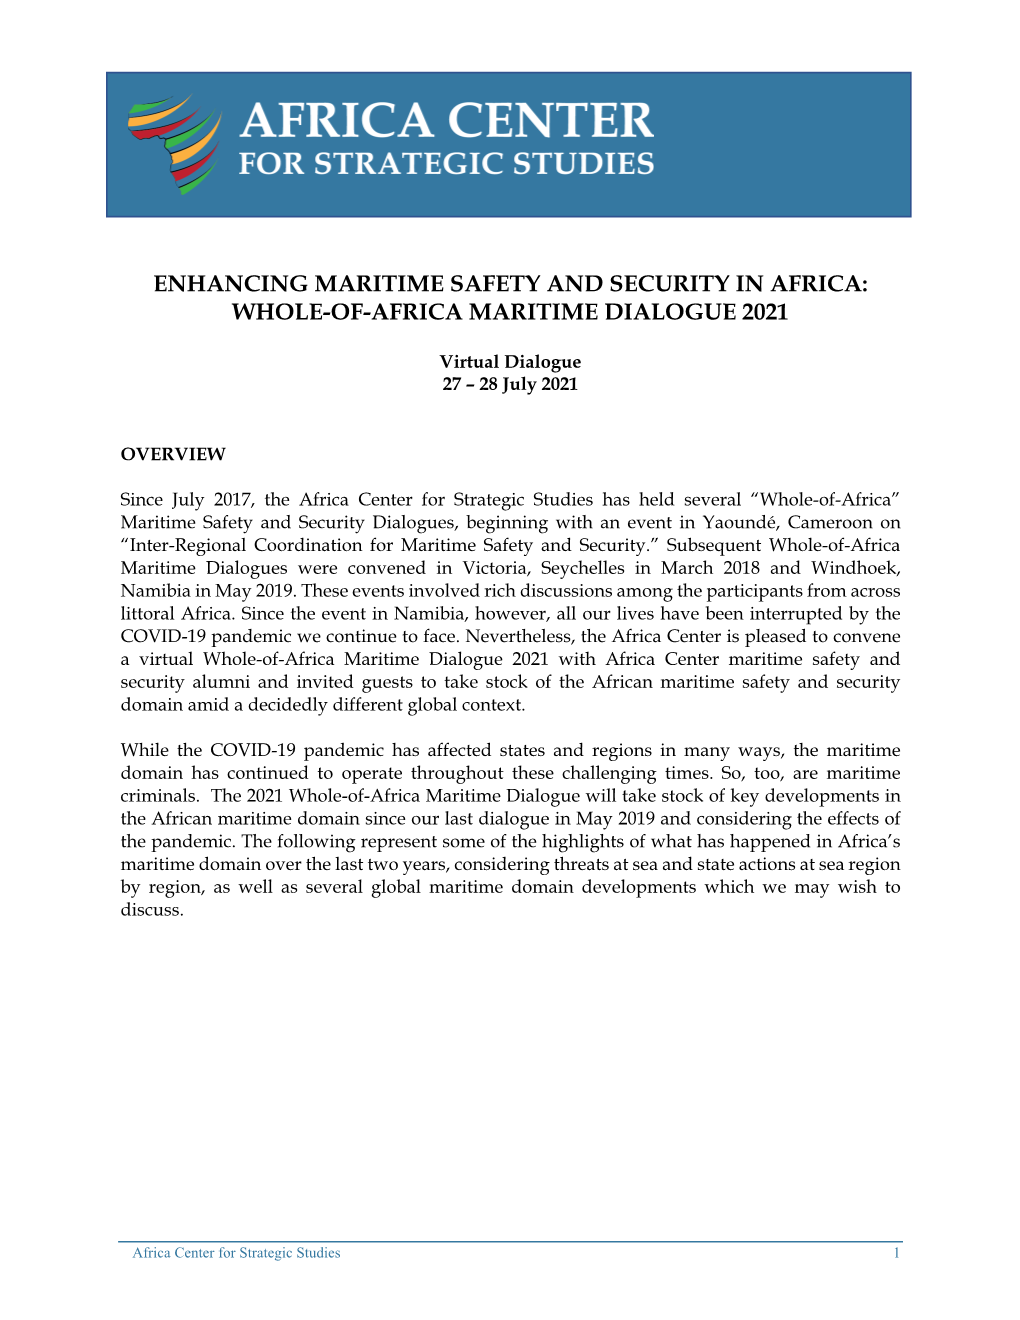 Whole-Of-Africa Maritime Dialogue 2021